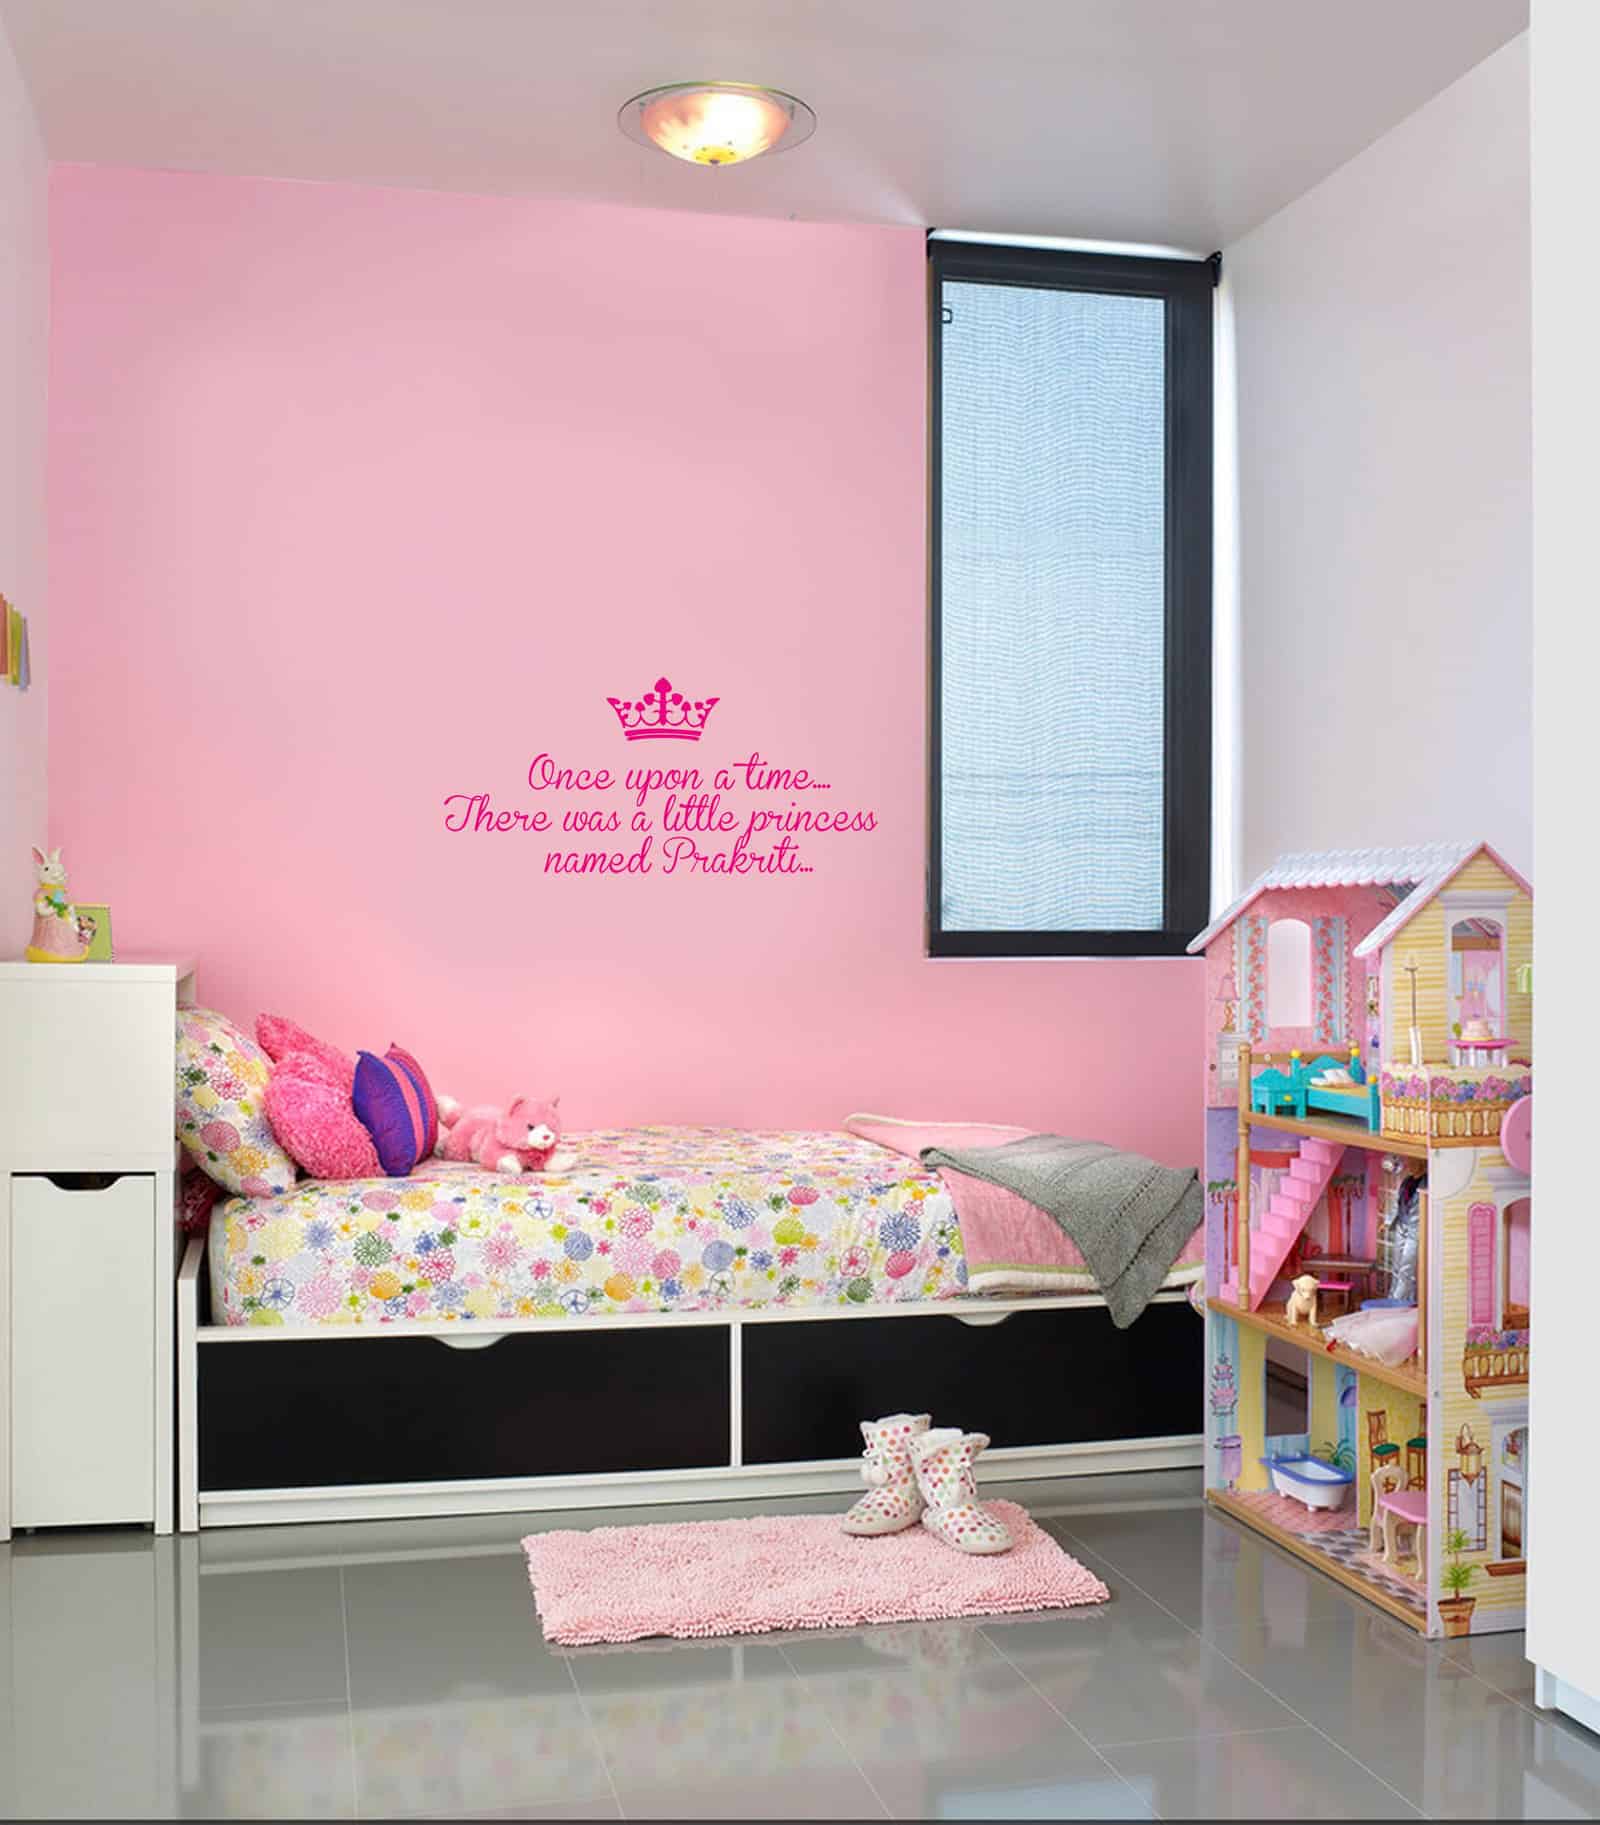 Once upon a Time Wall Sticker